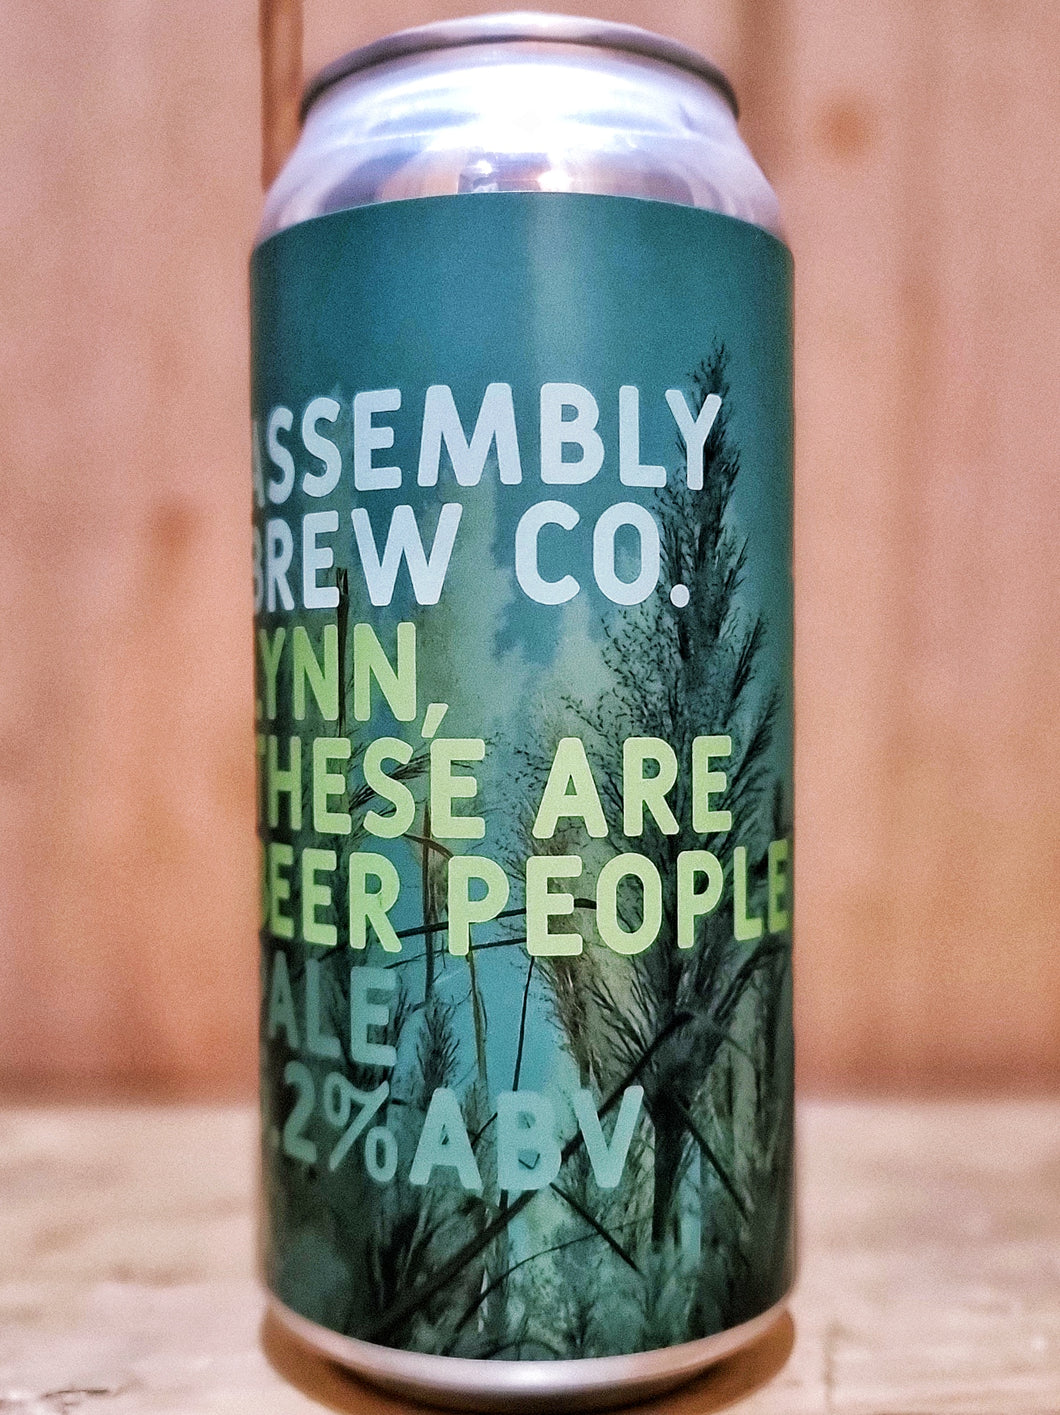 Assembly - Lynn, These Are Beer People